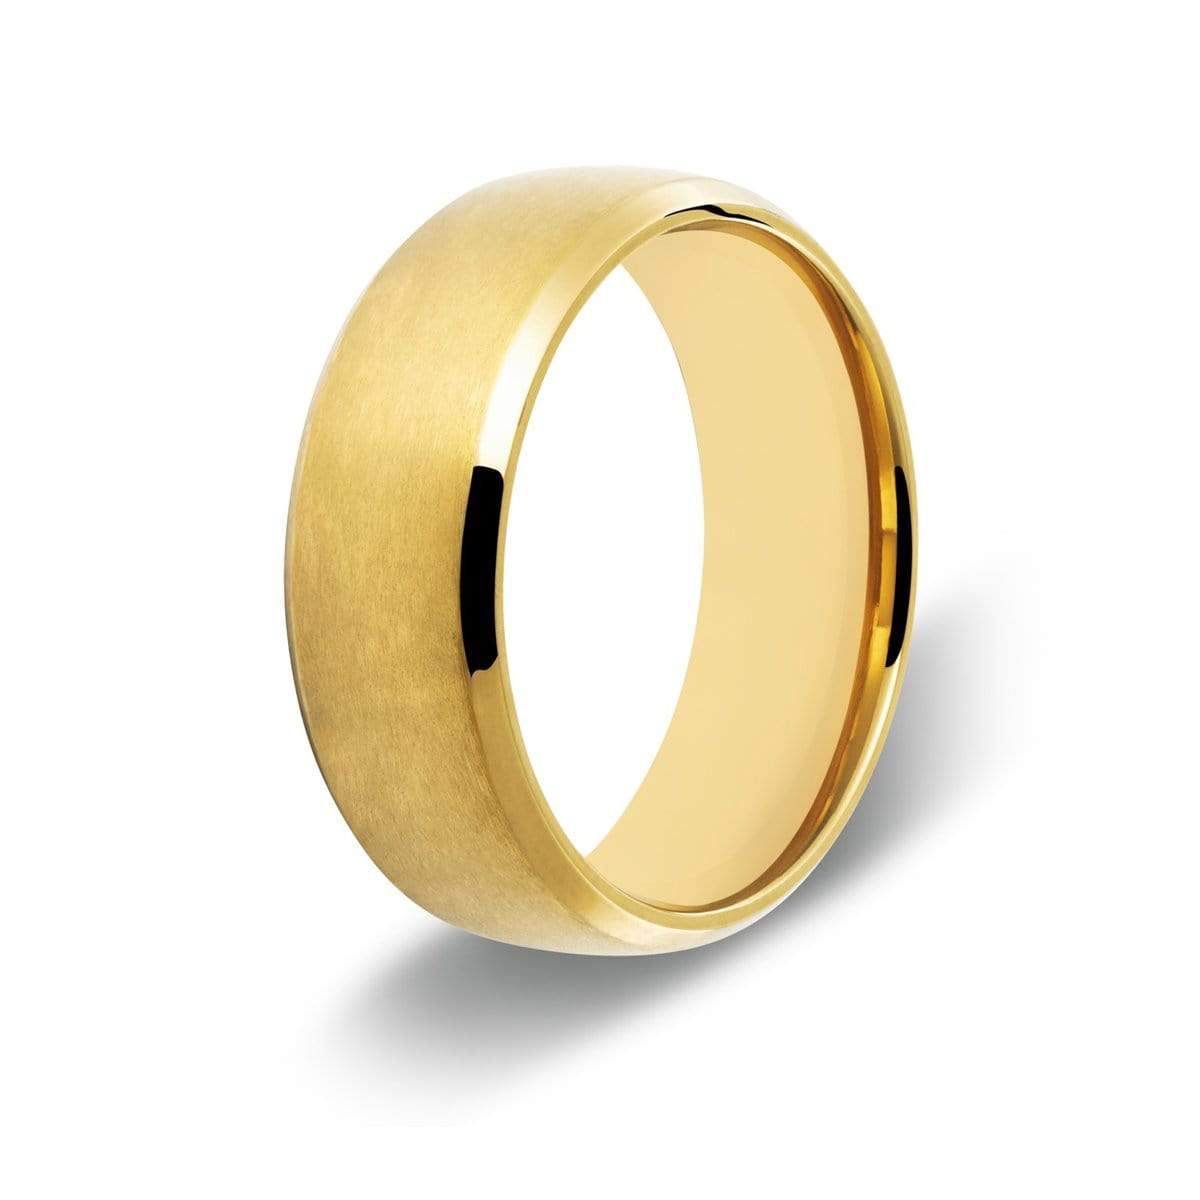 15 Best Men's Rings on Amazon in 2021: Signet, Engraved, Stackable | GQ